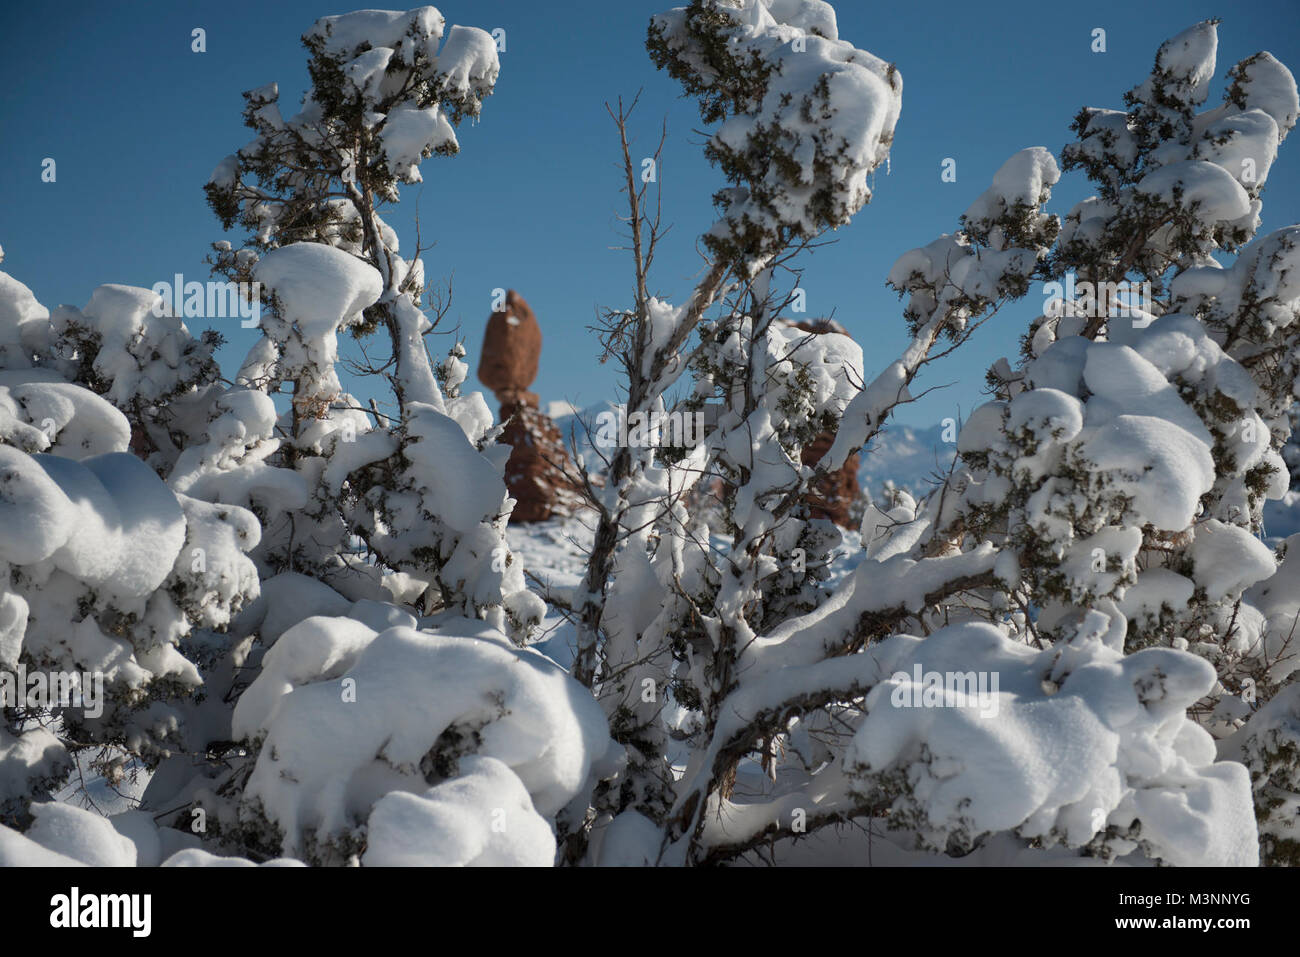 A snow-covered juniper with Balanced Rock Stock Photo